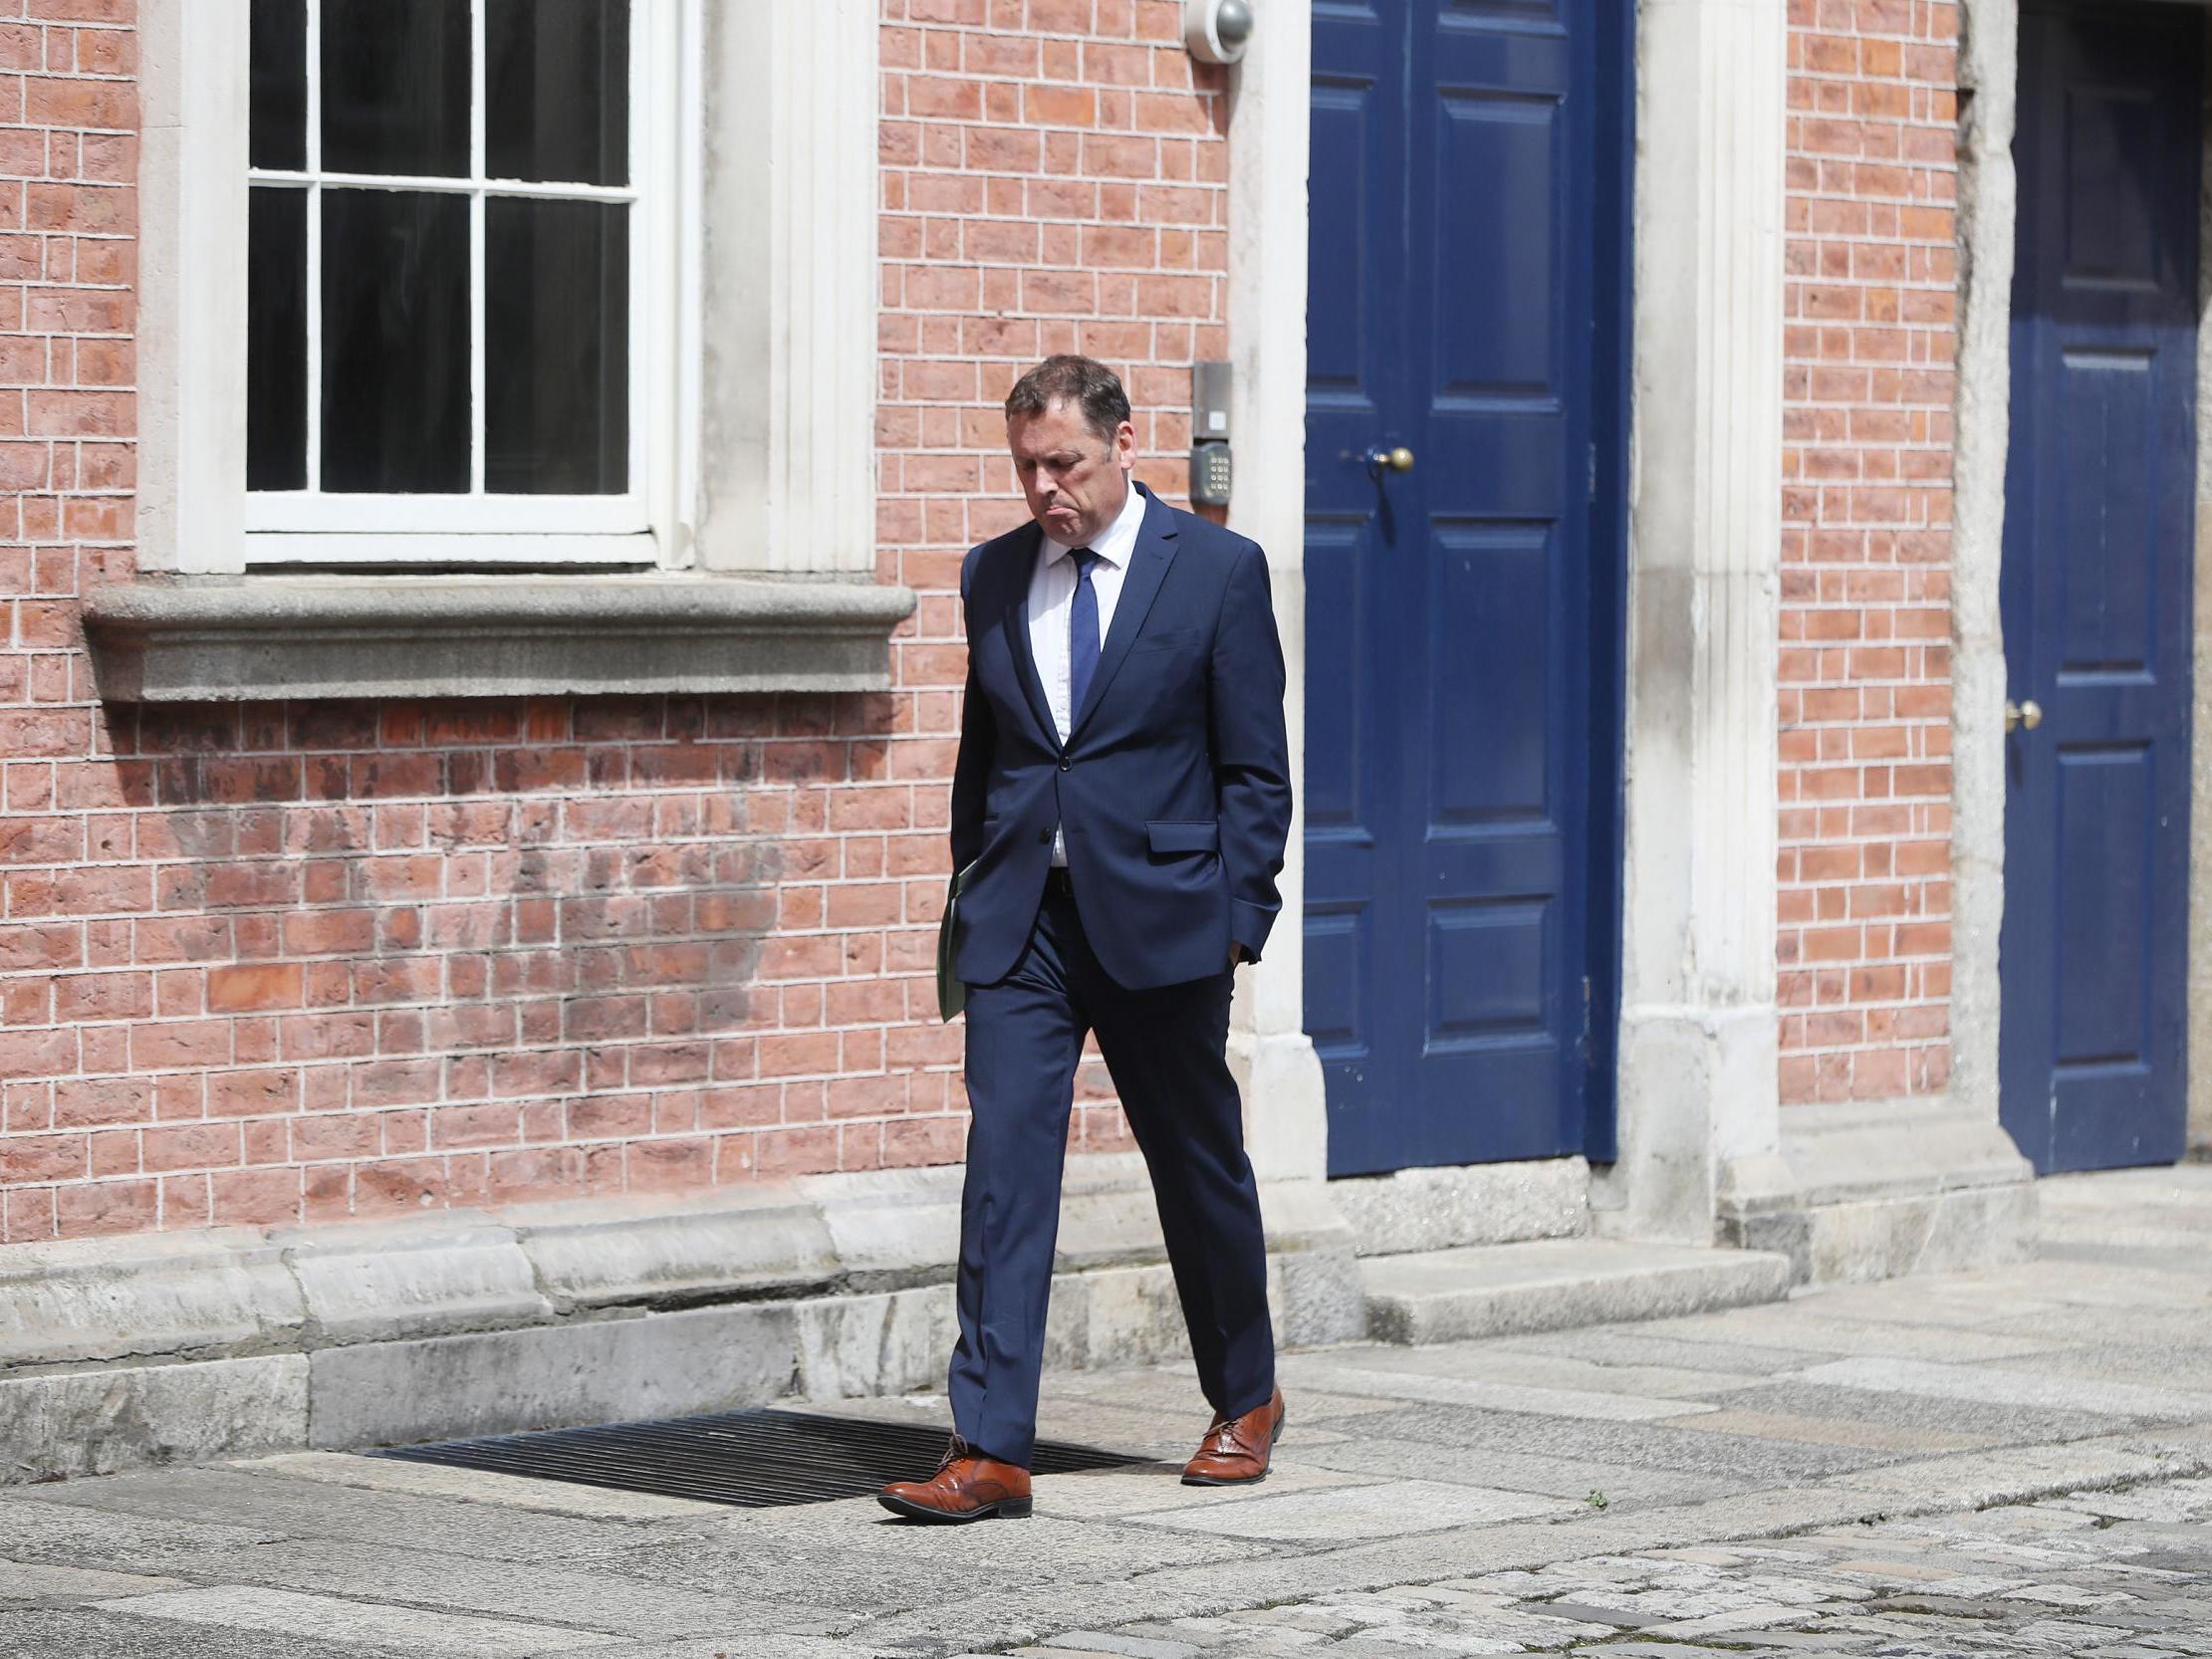 Former agriculture minister Barry Cowen arriving for the cabinet meeting at Dublin Castle.